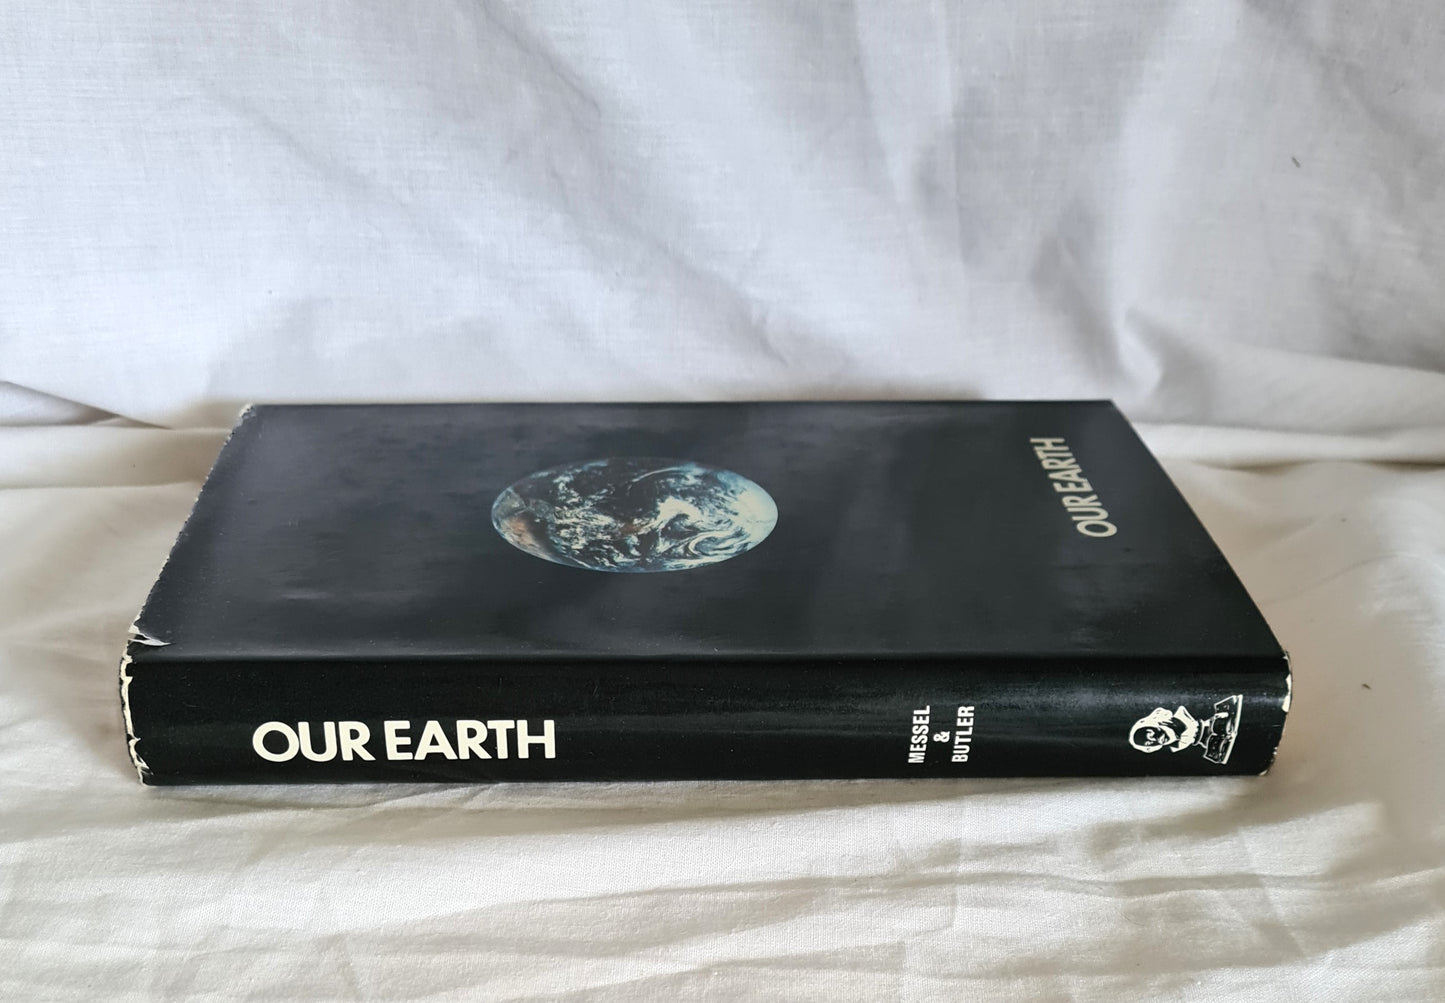 Our Earth by H. Messel and S. T. Butler